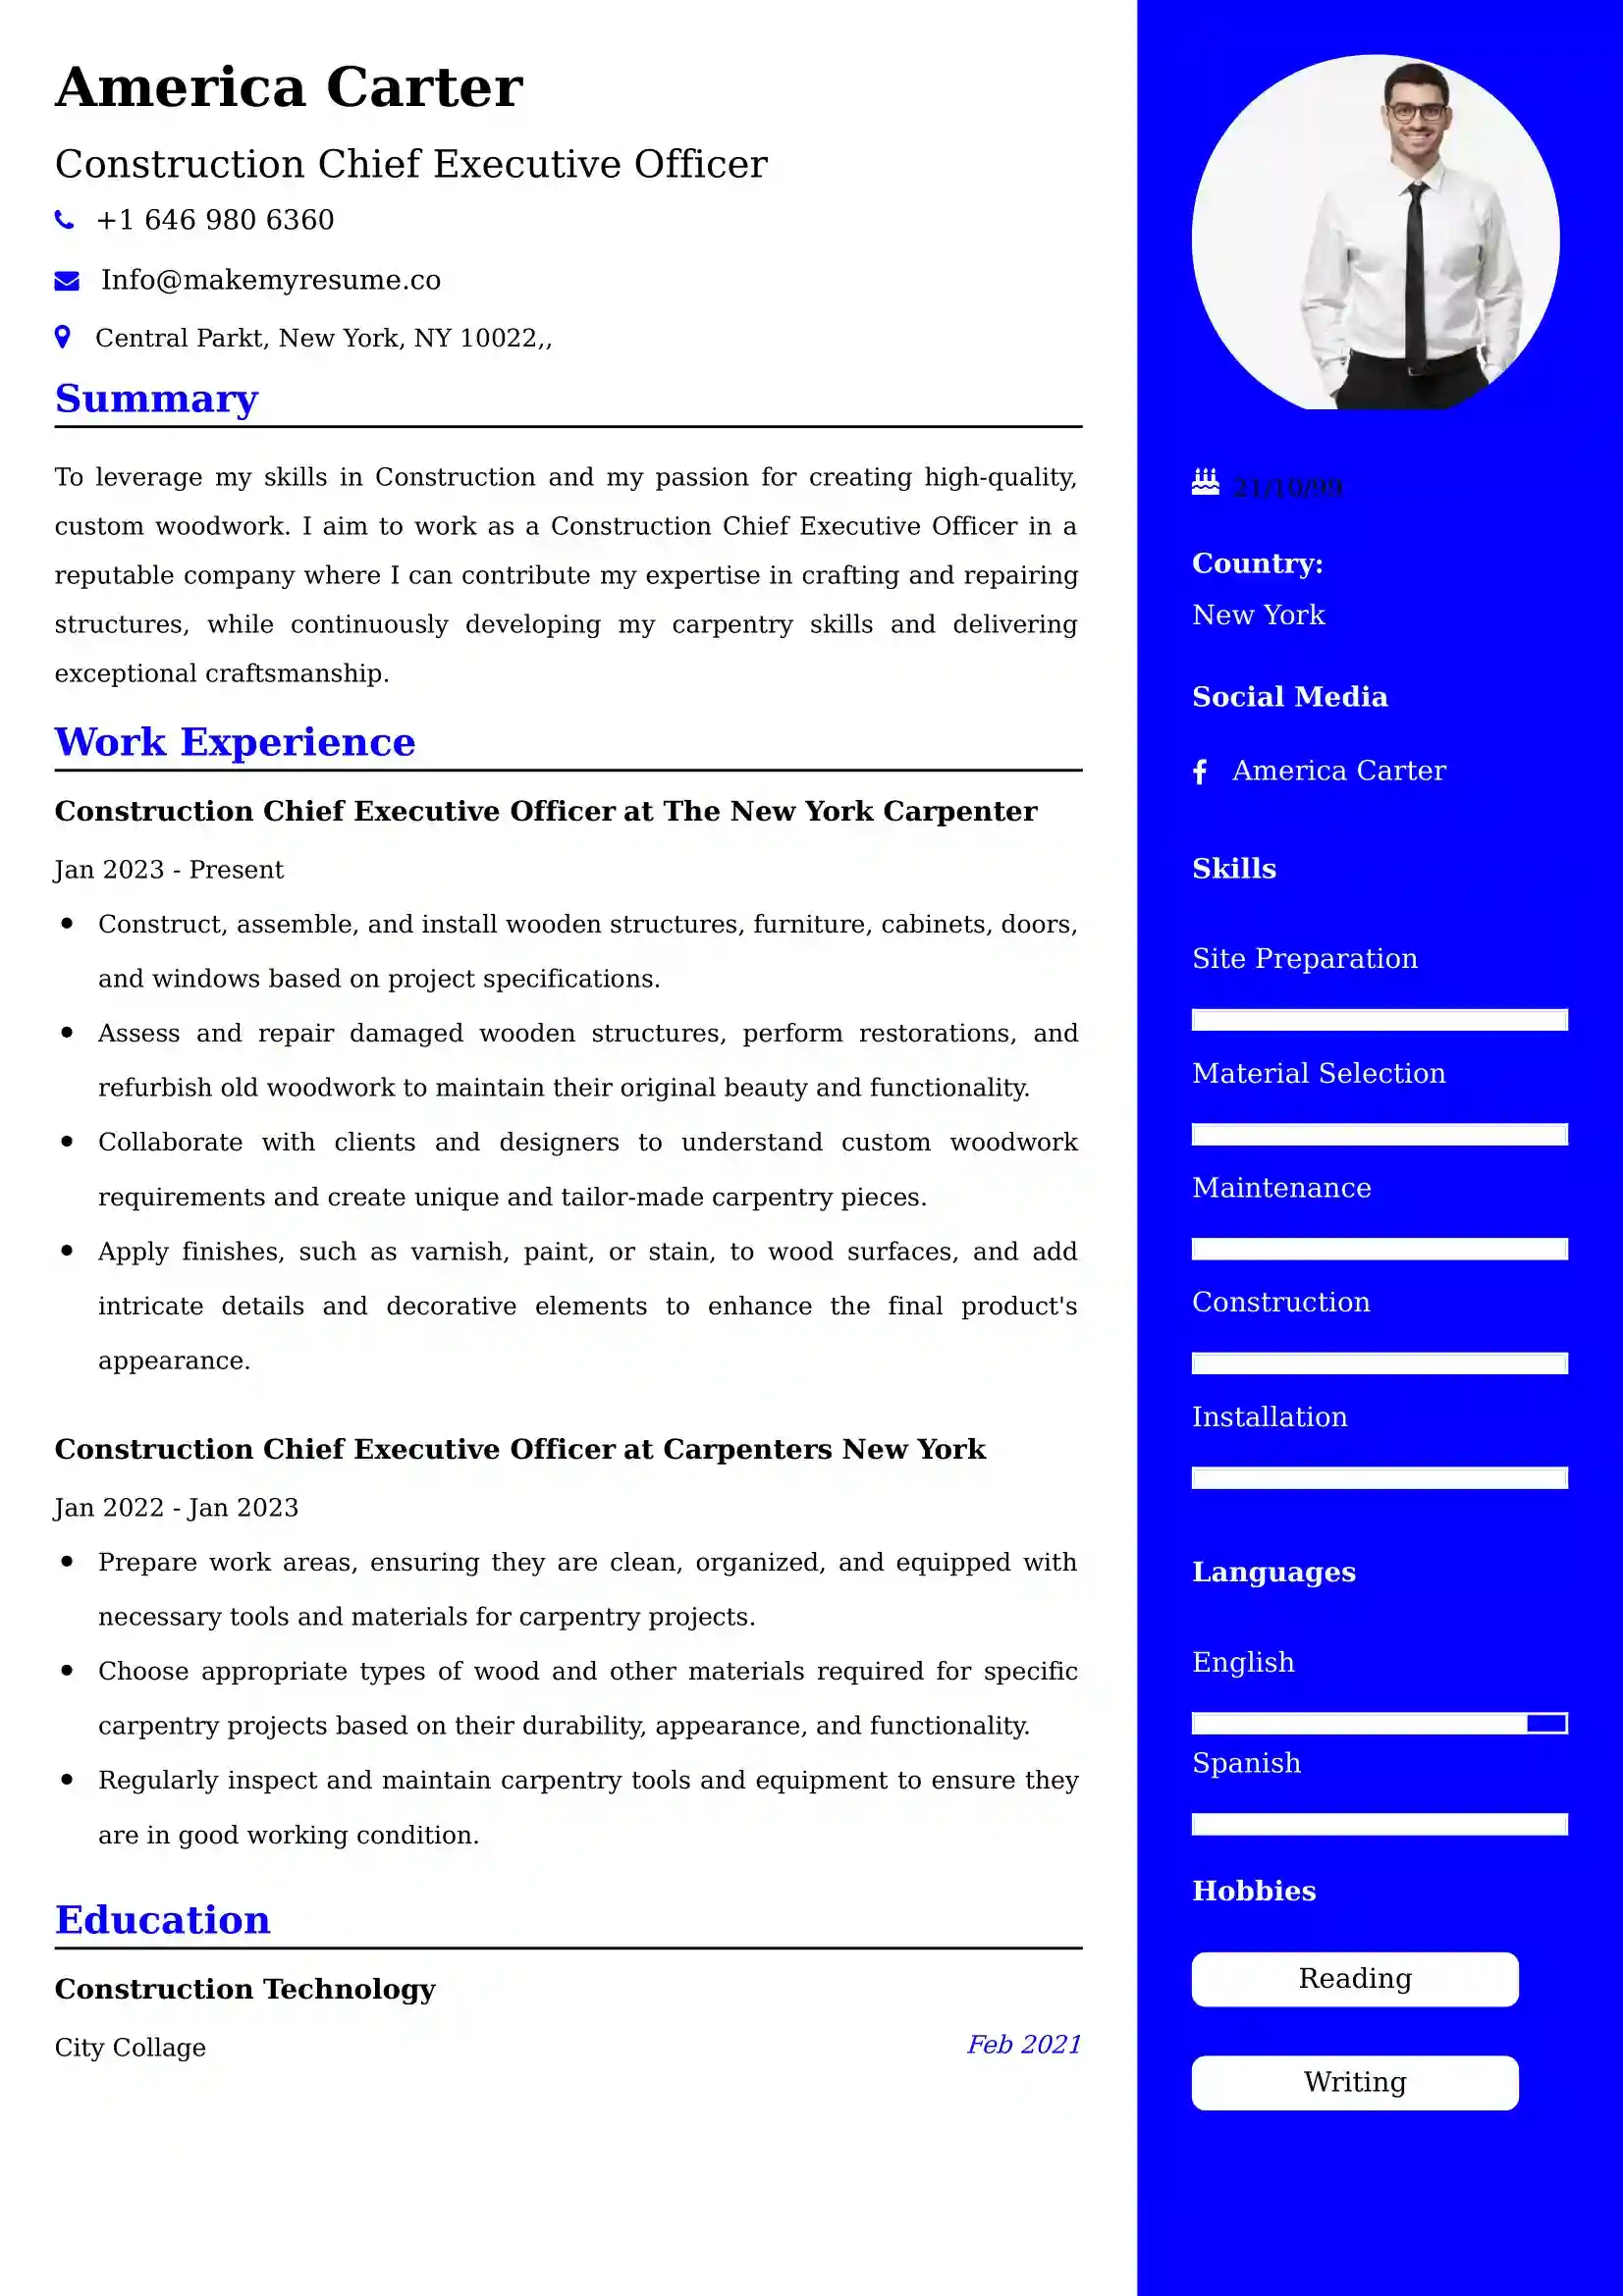 Construction Chief Executive Officer Resume Examples - Australian Format and Tips